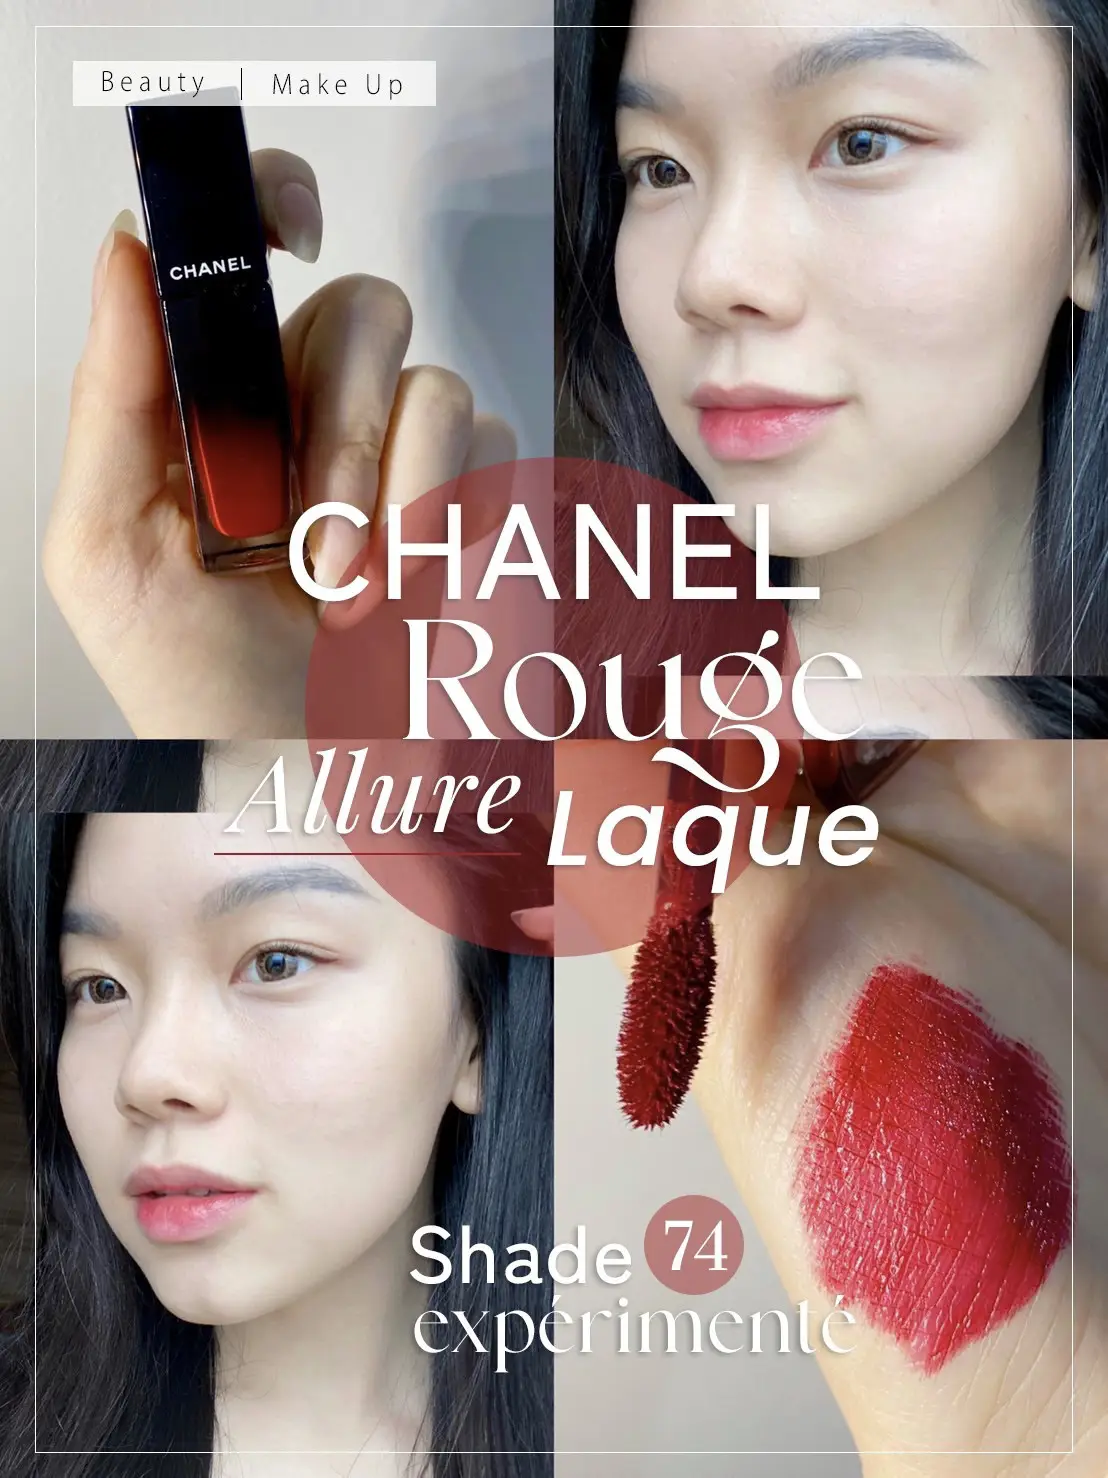 Chanel lip tint review, Gallery posted by Mikha Emmanuel